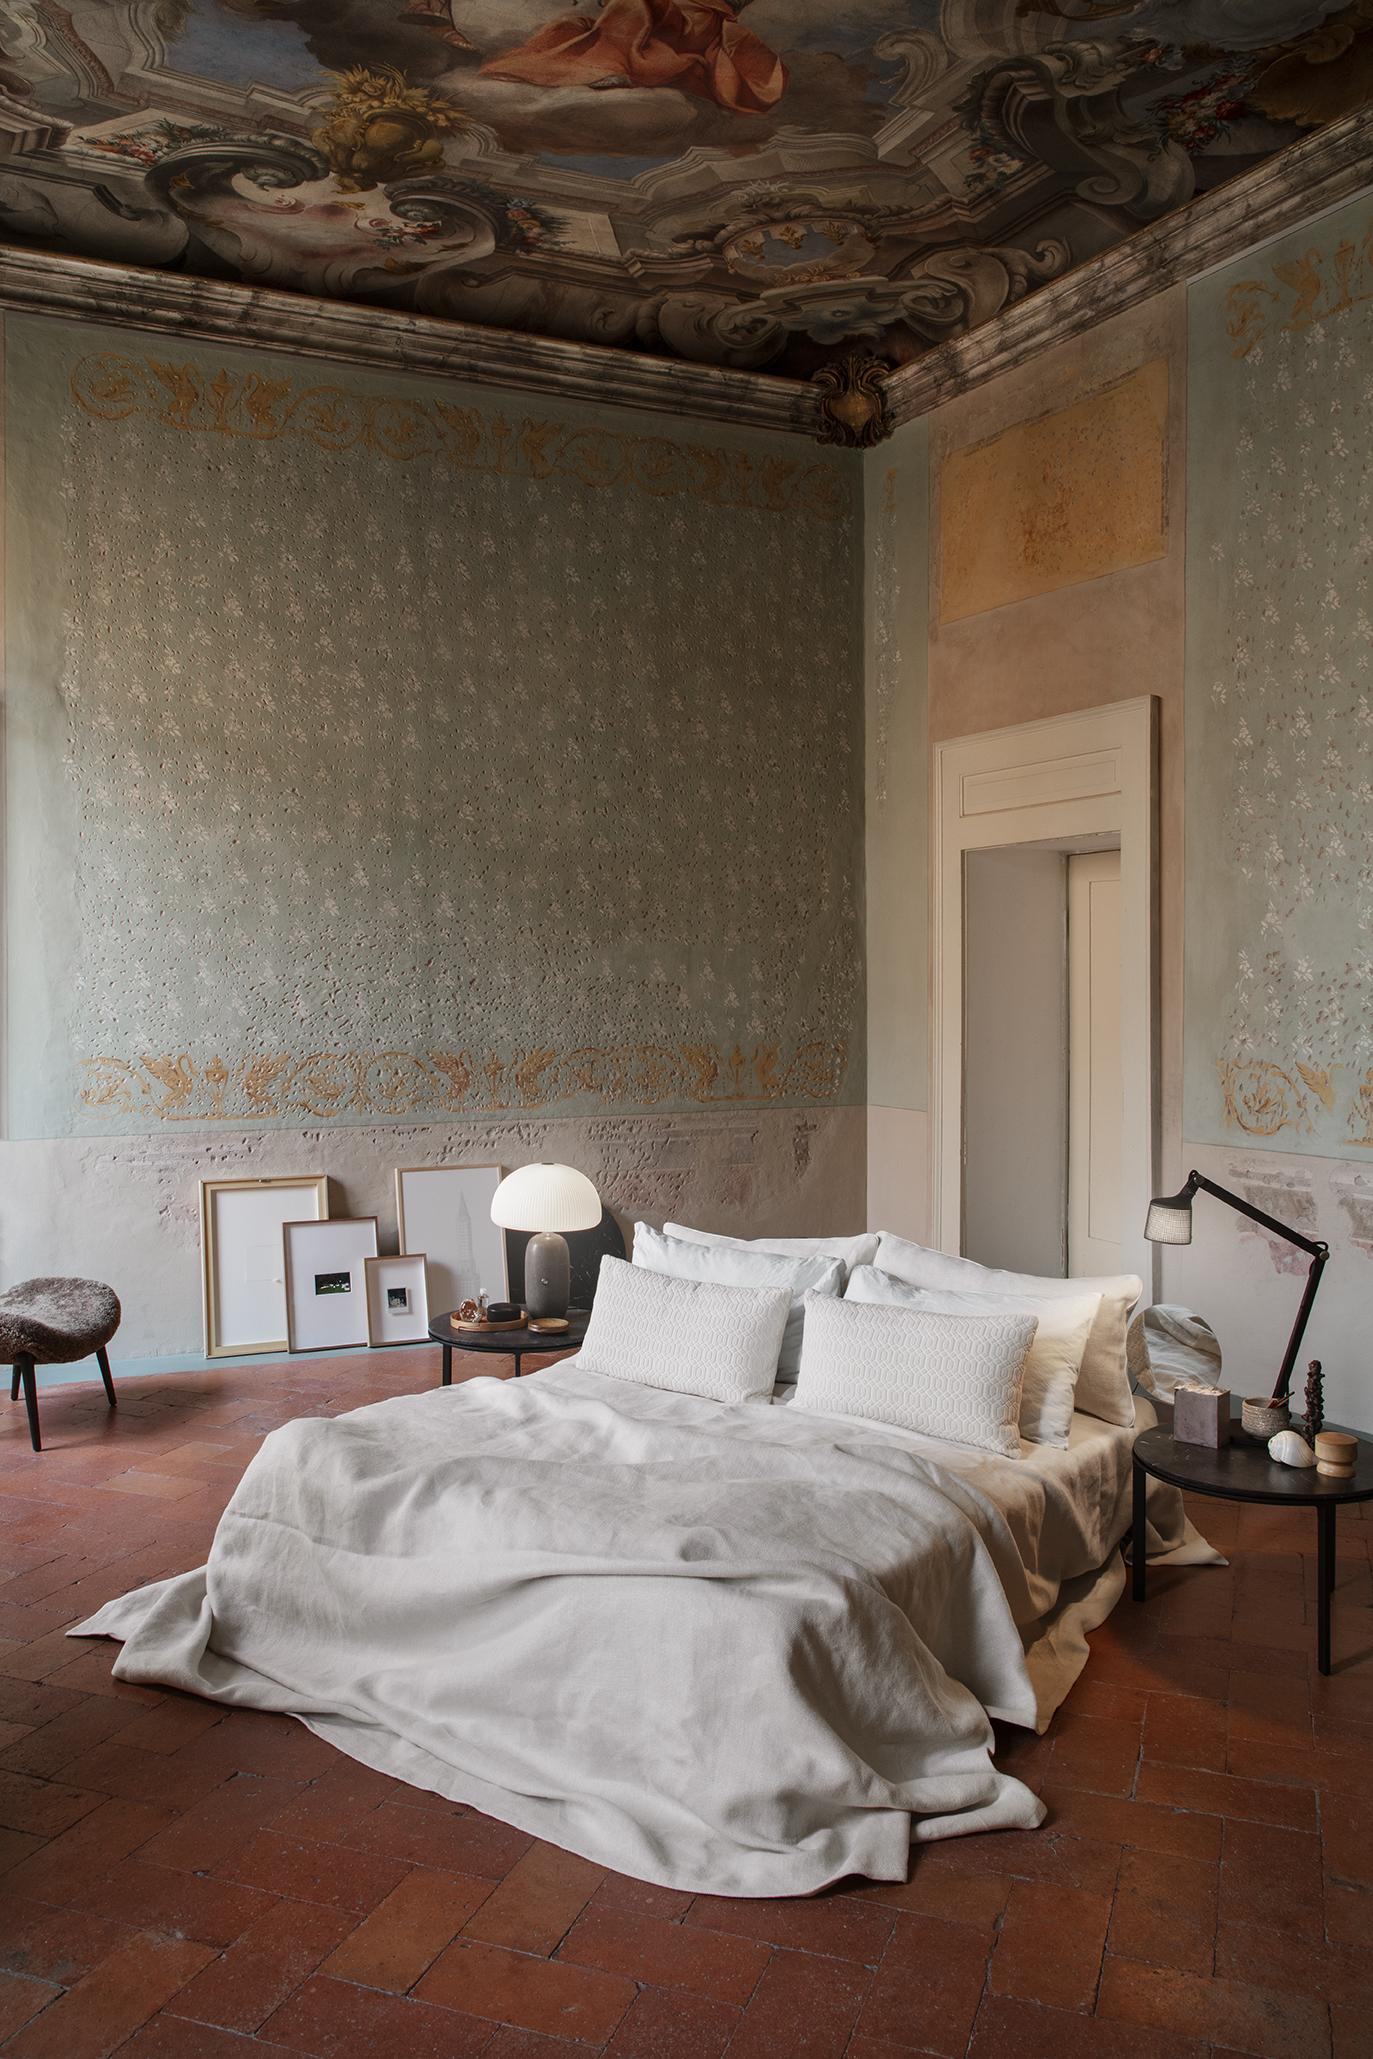 the bed is set on a terra cotta floor \10 feet under a baroque fresco. the beds 18